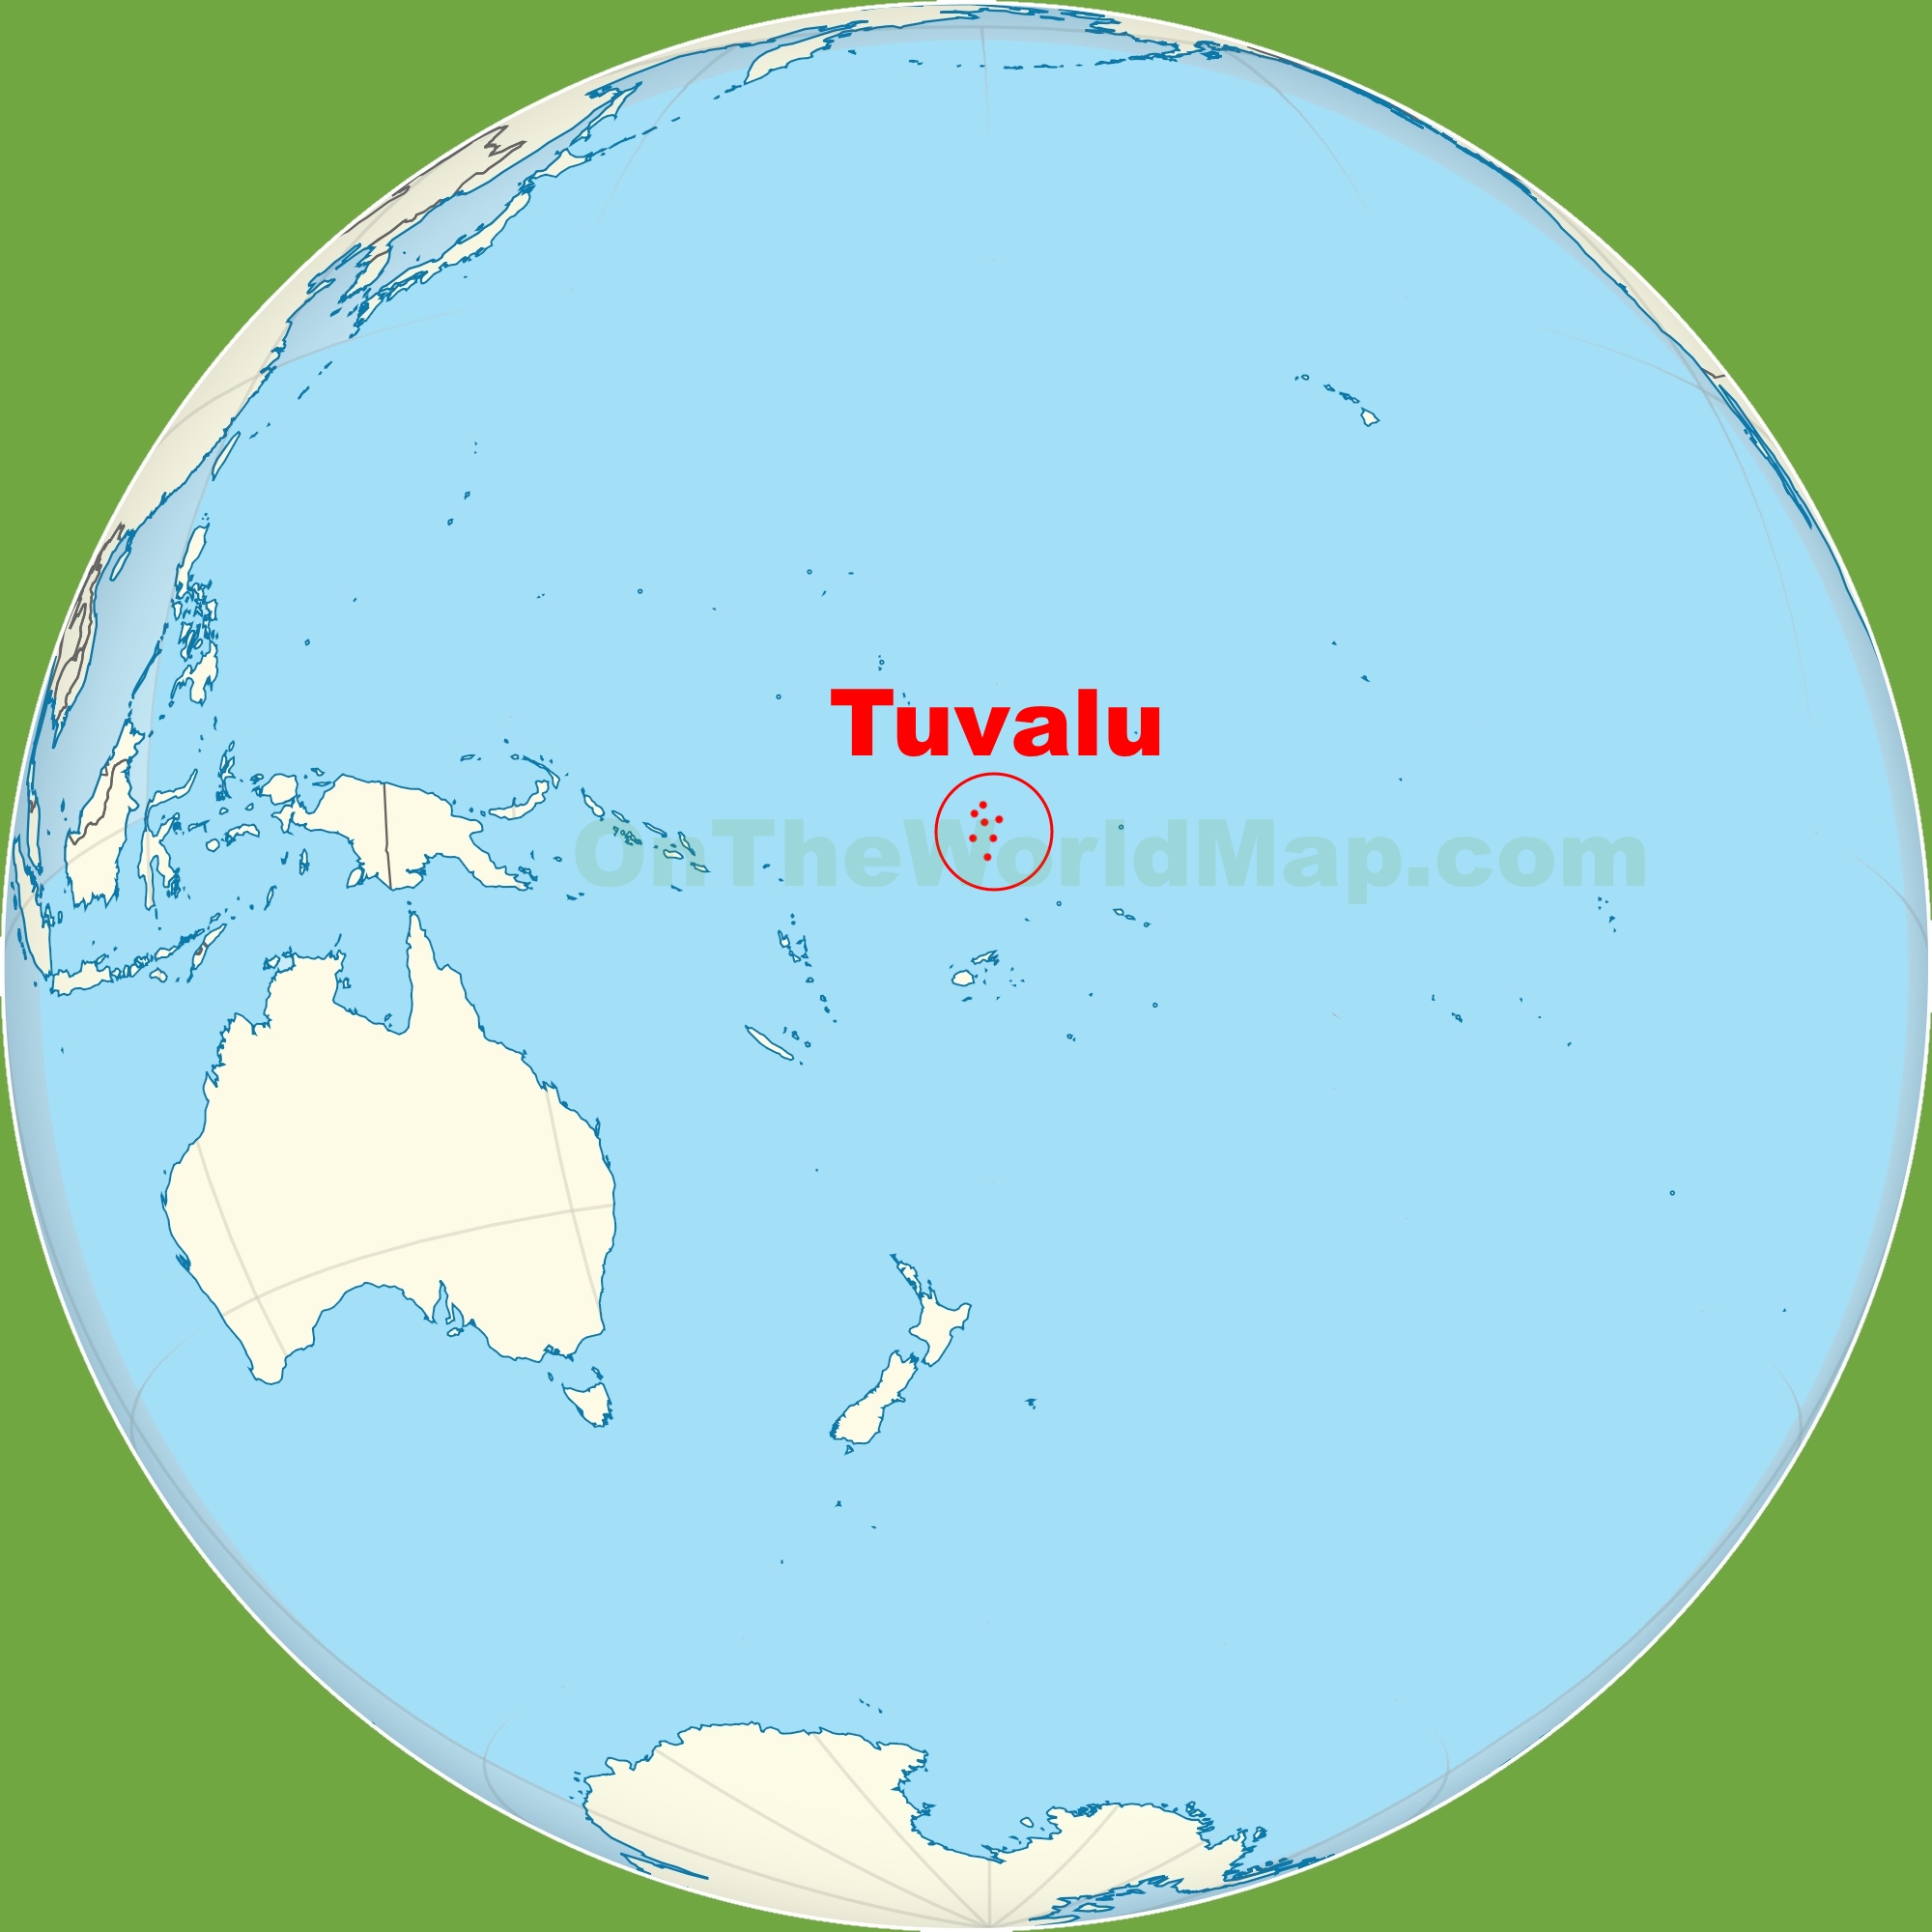 where is tuvalu located on the world map Tuvalu Location On The Pacific Ocean Map where is tuvalu located on the world map